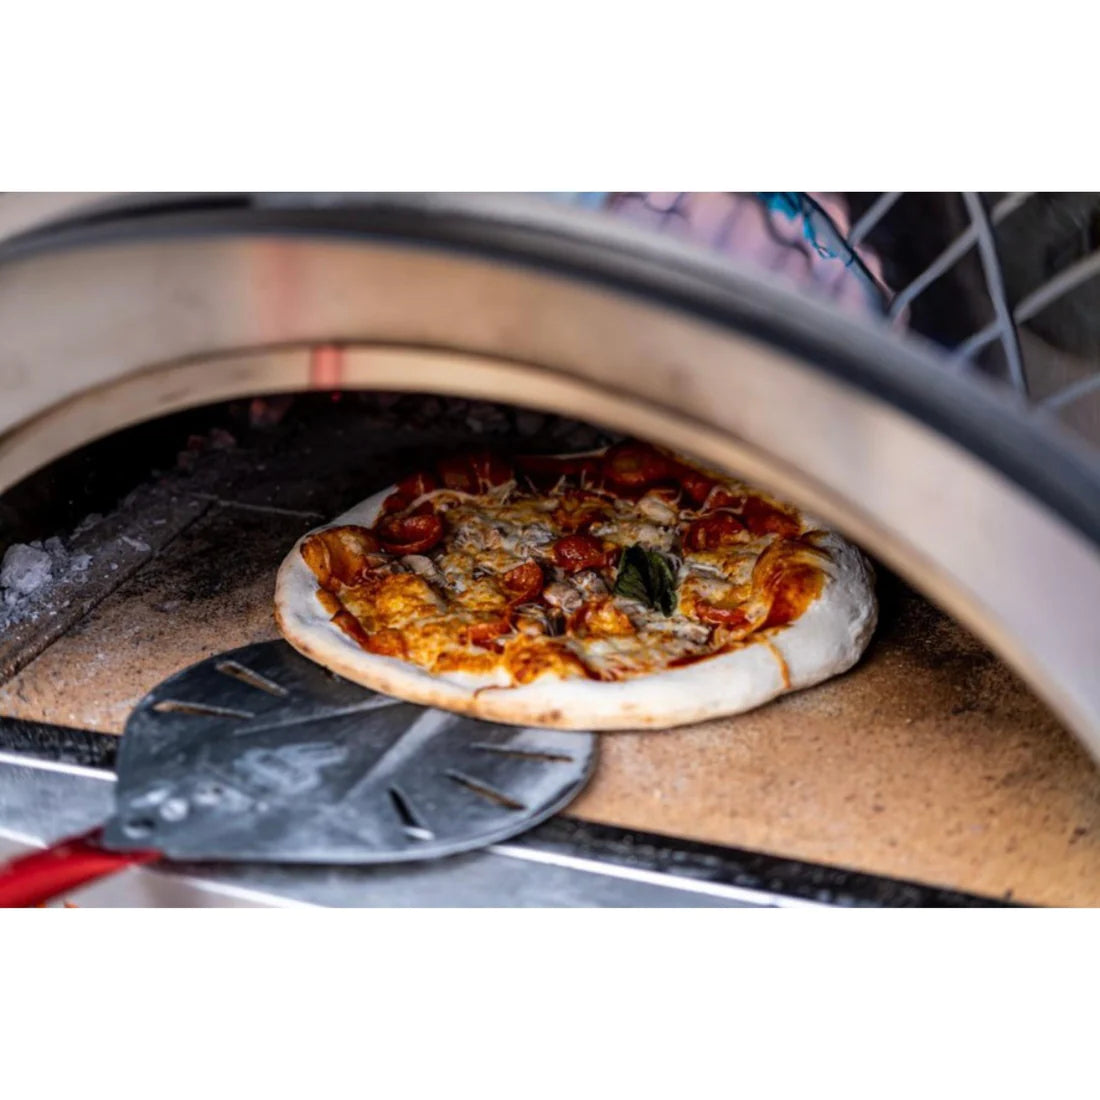 WPPO LLC Karma 25 Pizza Oven (with Base)